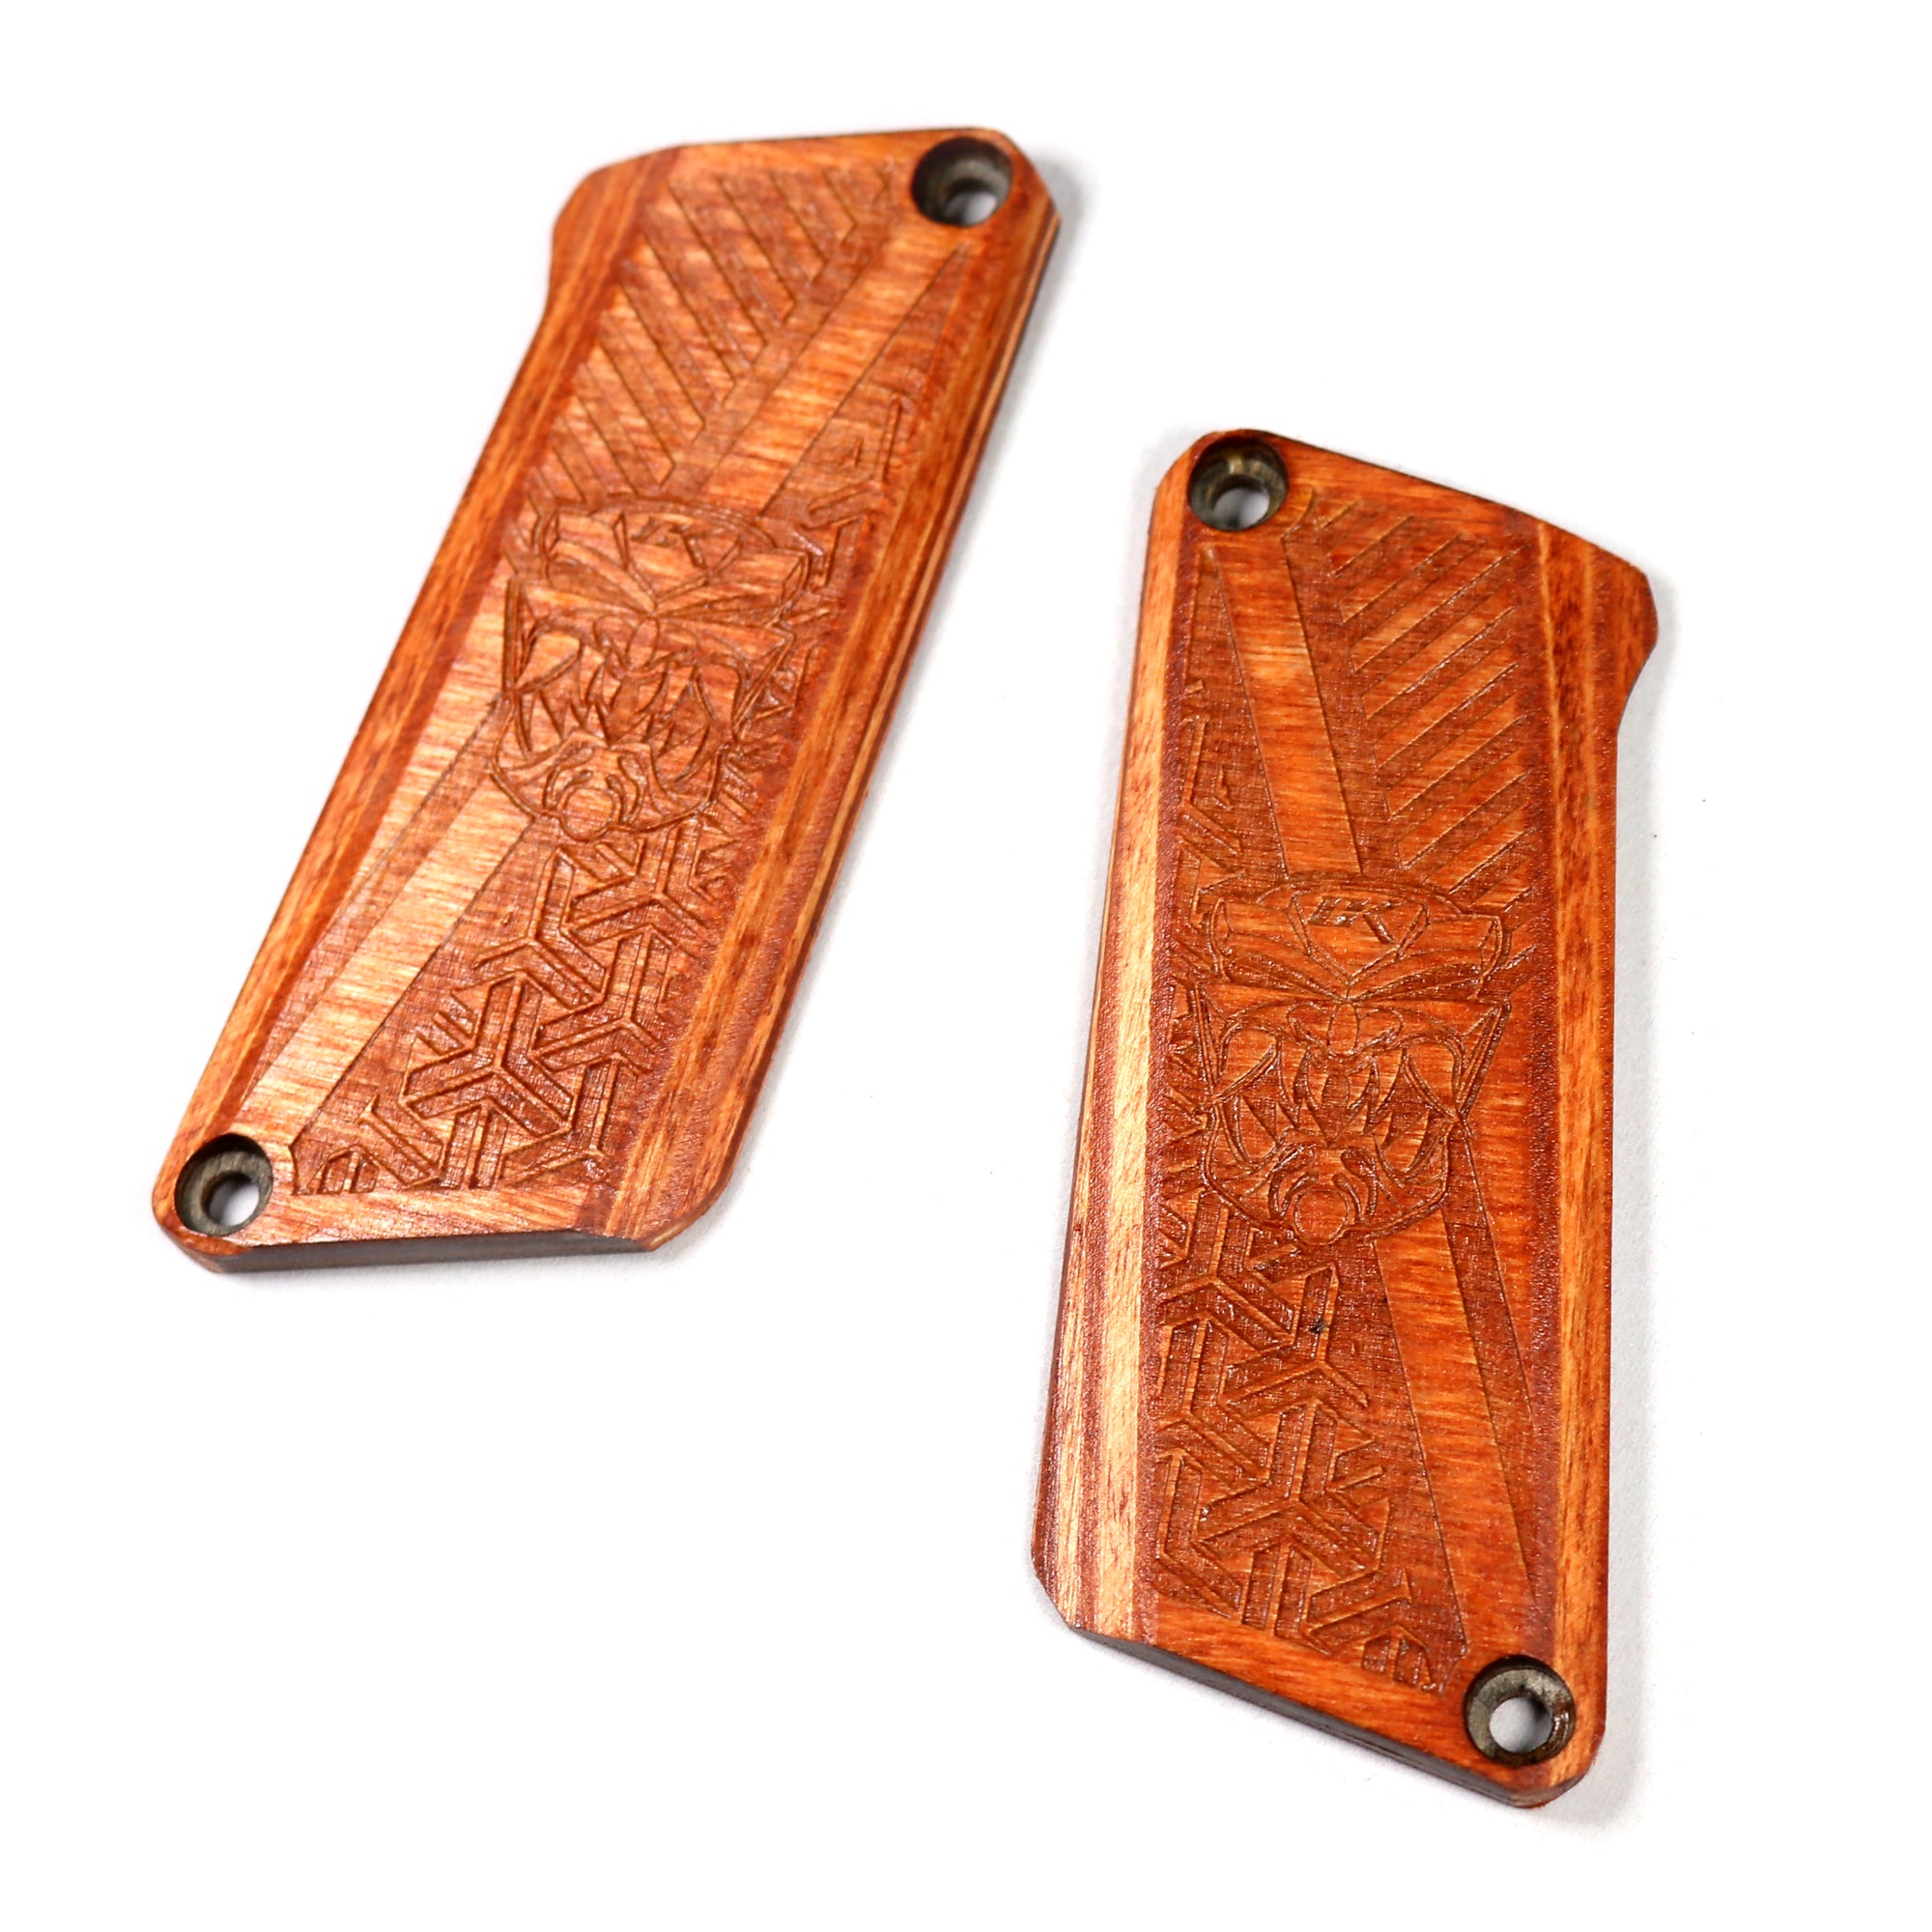 Contract Killer Tiki Paintball Grips - Field 1 G6R - TWO PIECE BUILD